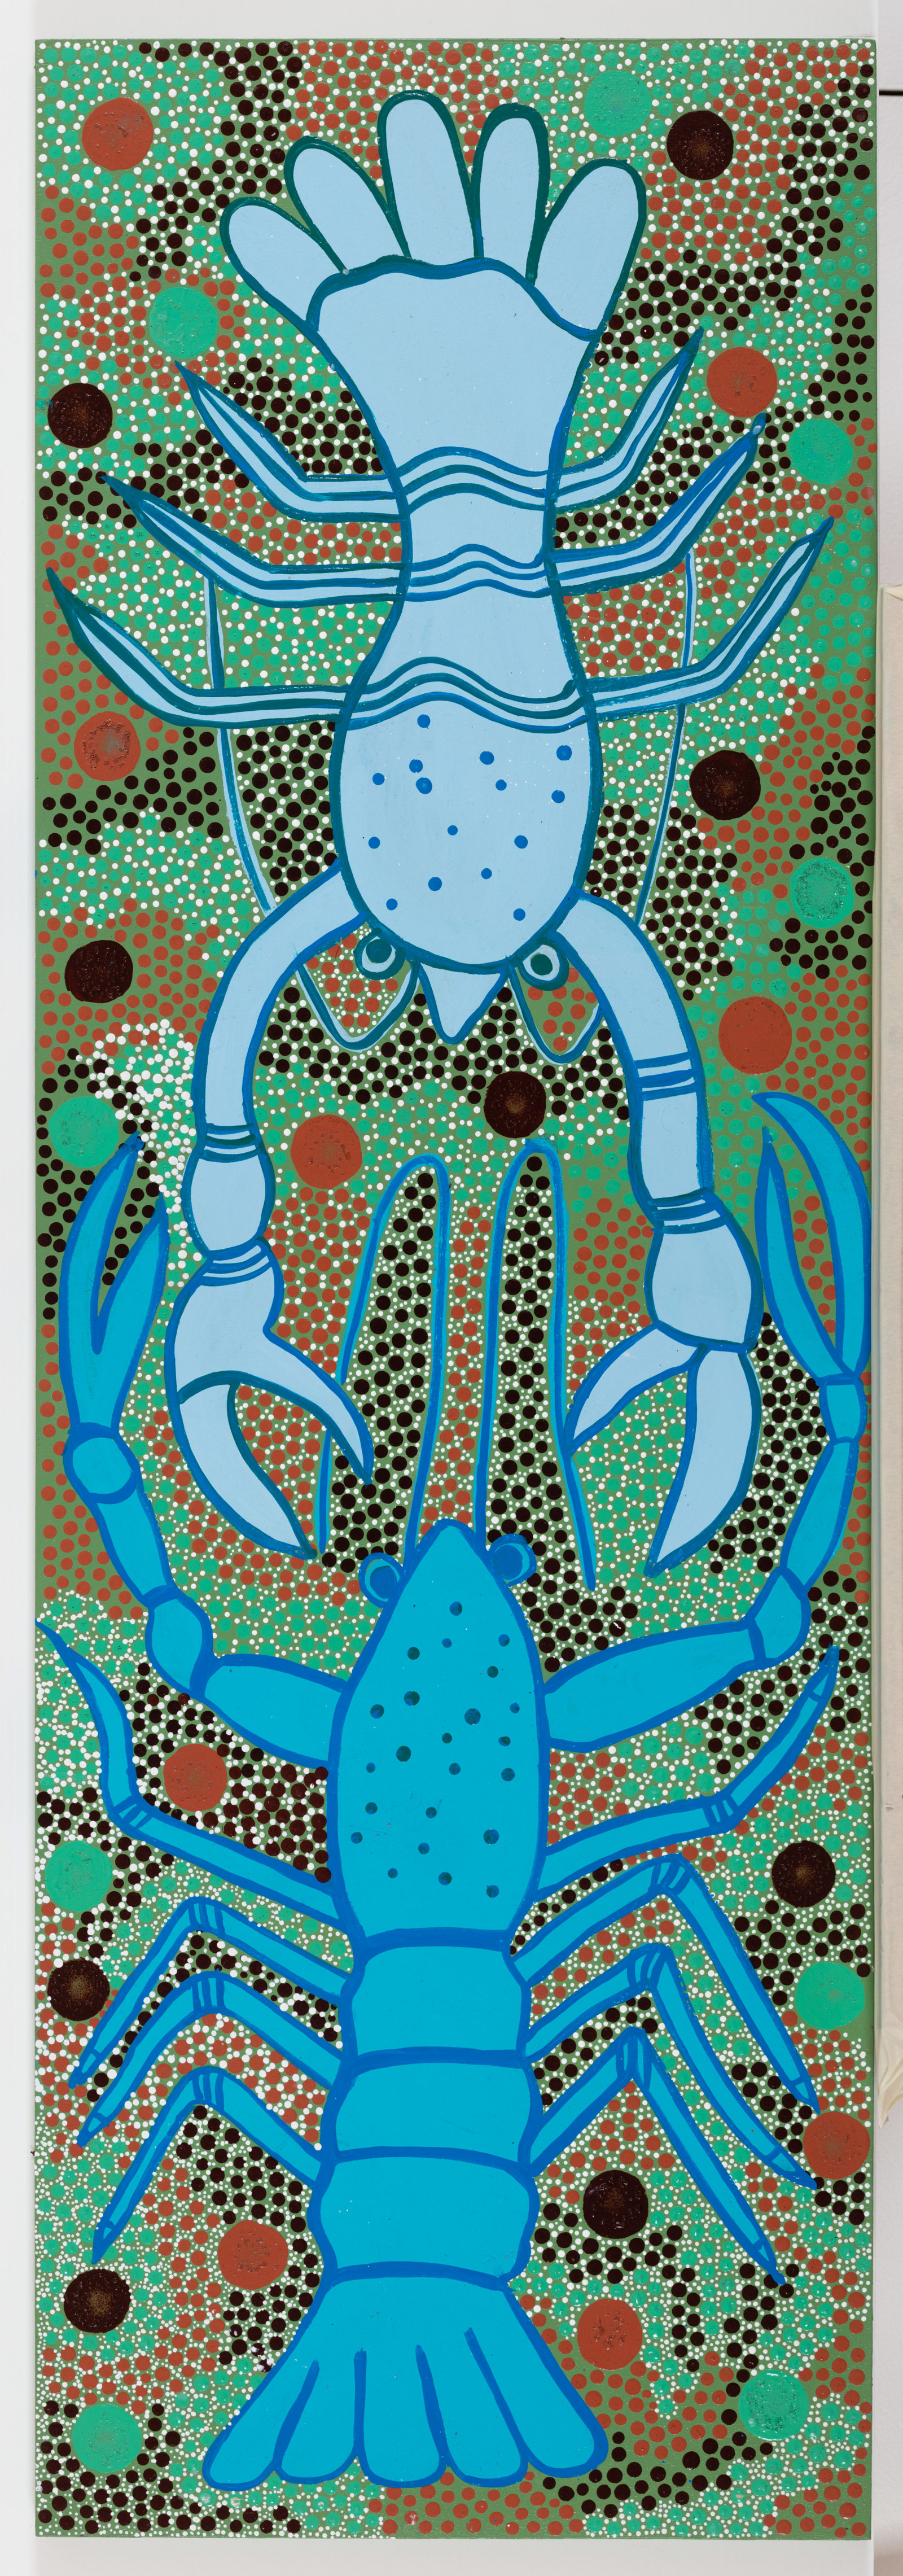 Yabby, Meahala Langlo-Brown, 2023, acrylic on plywood board, 122.5cm x 41cm
Newcomers to our lagoon were not there until a couple of years ago. Discovered by our kids.